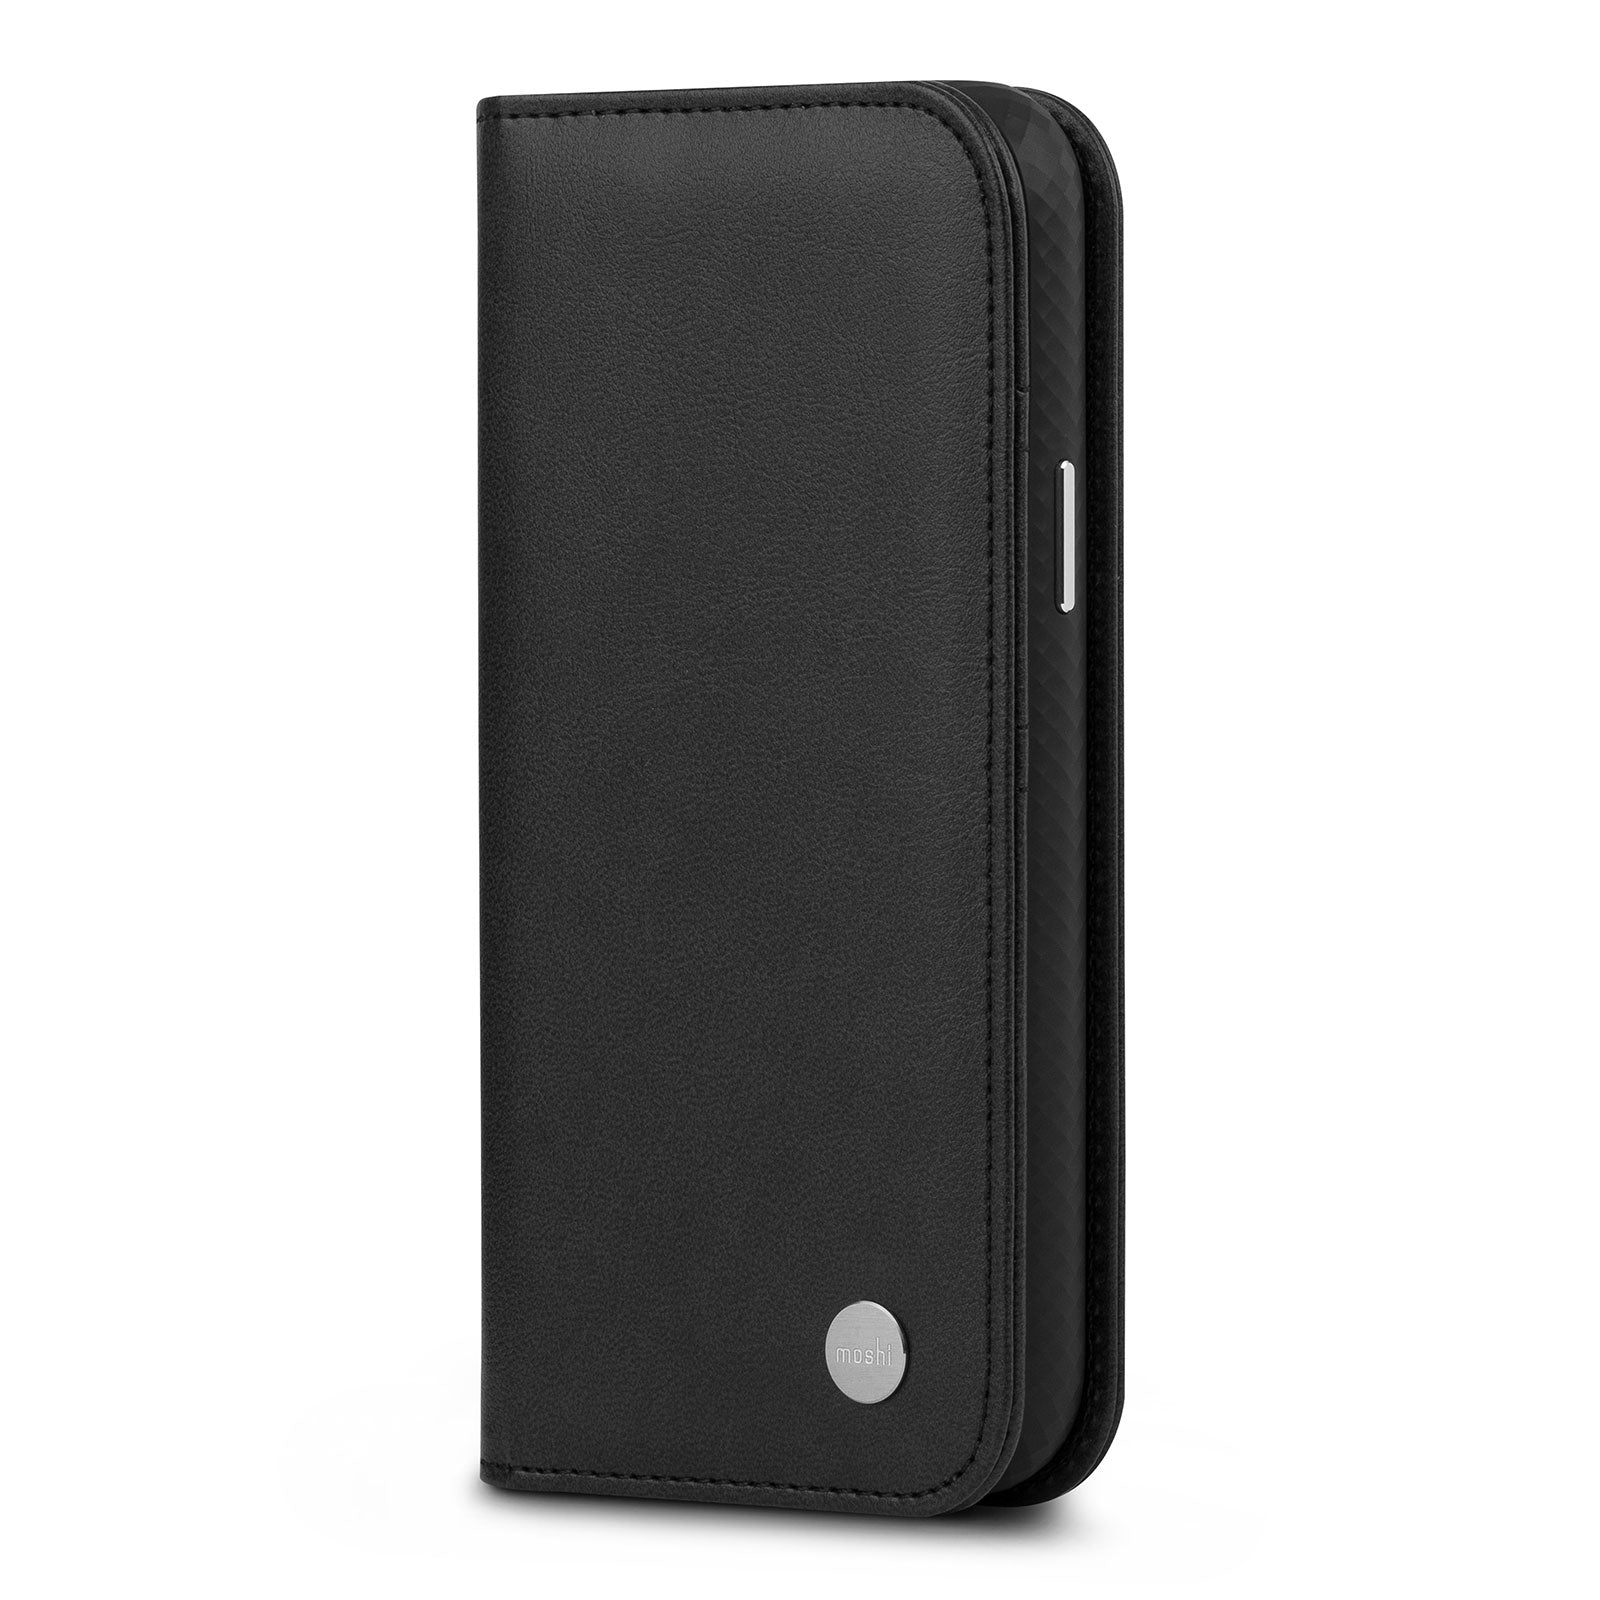 Moshi Overture Wallet Case For iPhone 12 Pro Max - Jet Black - Mac Addict